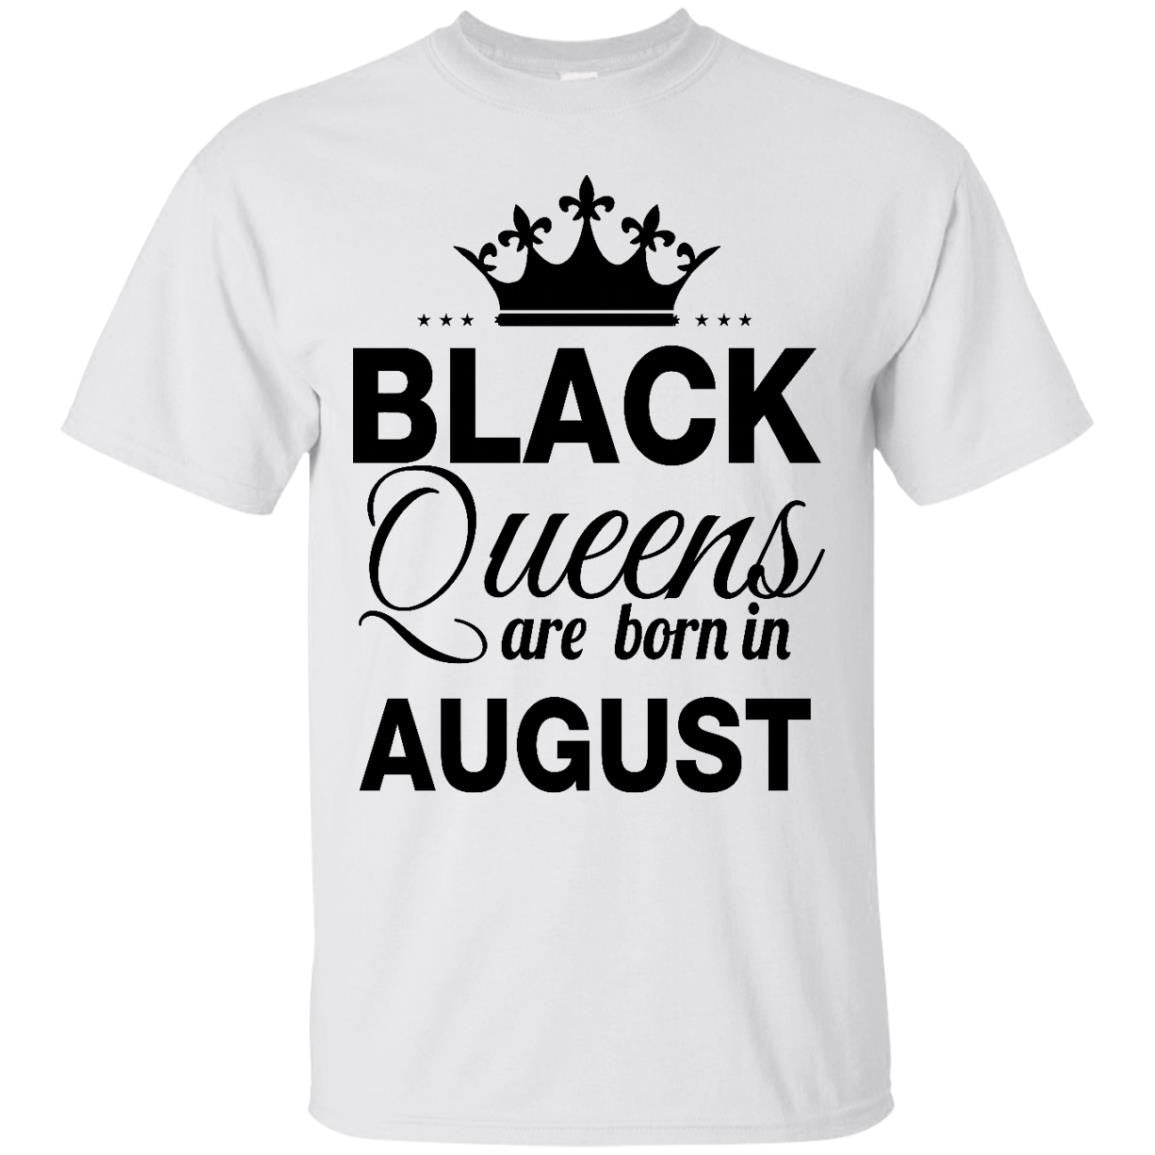 Black Queen are born in August shirt, tank top, hoodie